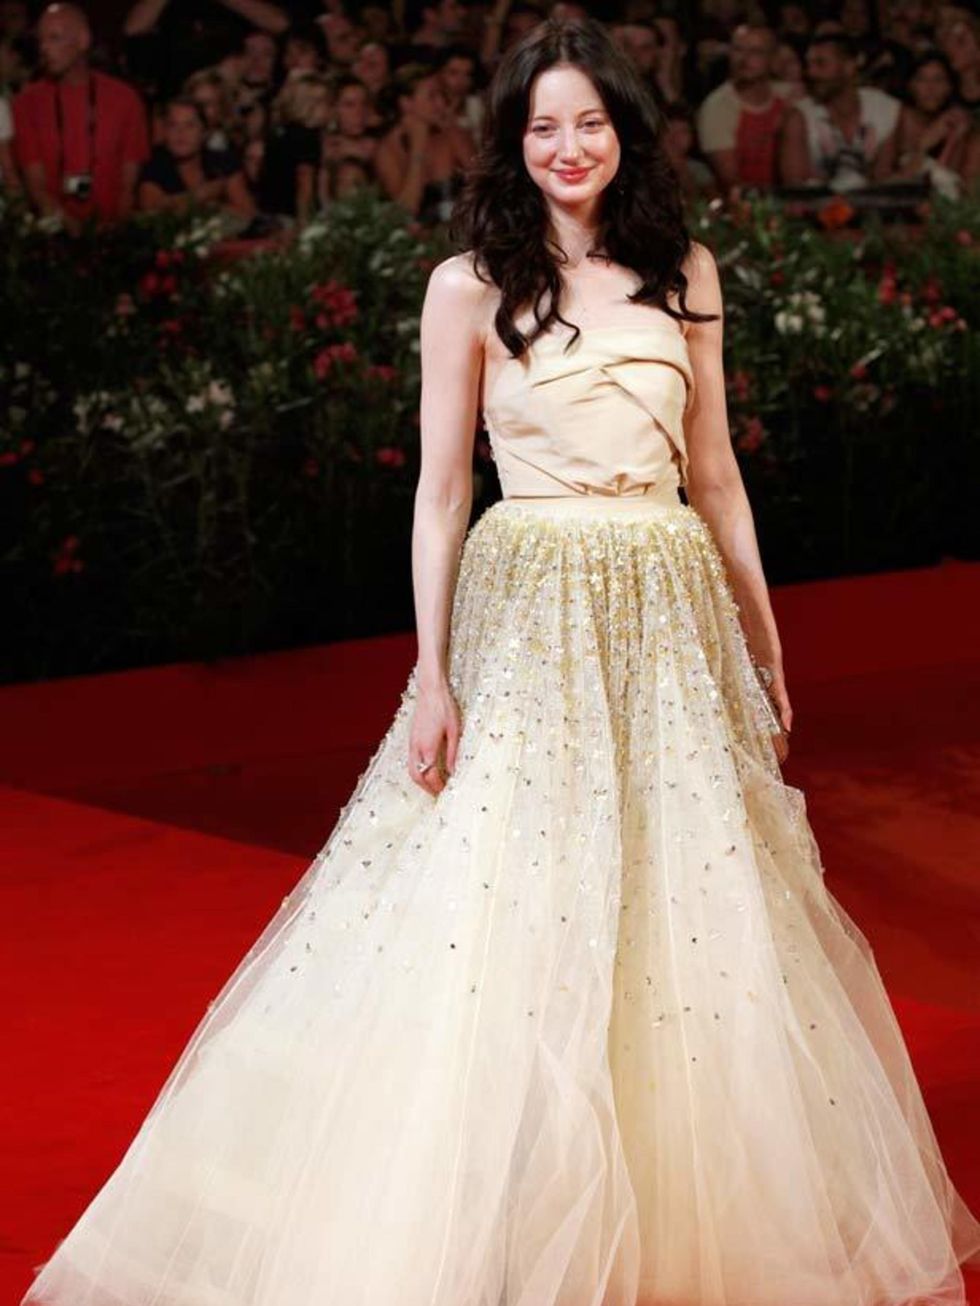 <p>Andrea Riseborough stunned in a strapless <a href="http://www.elleuk.com/catwalk/collections/christian-dior/">Christian Dior Couture</a> gown, <a href="http://www.elleuk.com/content/search?SearchText=Chopard&amp;SearchButton=Search">Chopard</a> earring